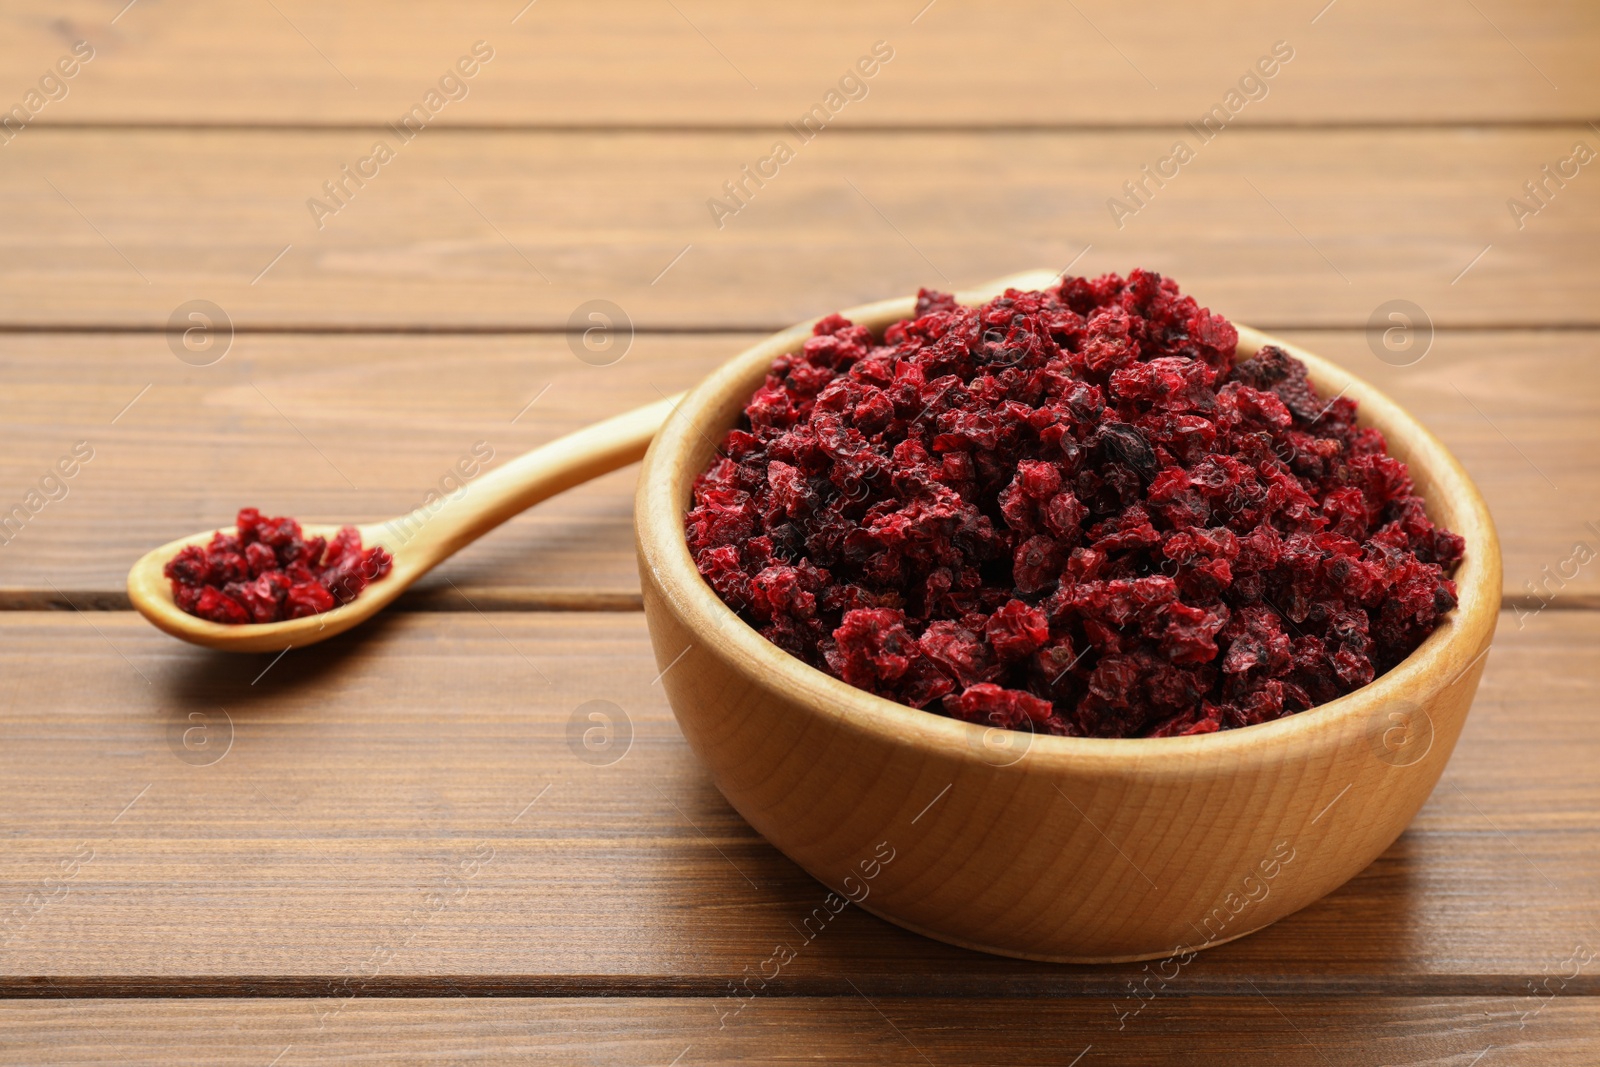 Photo of Dried red currants in bowl and spoon on wooden table